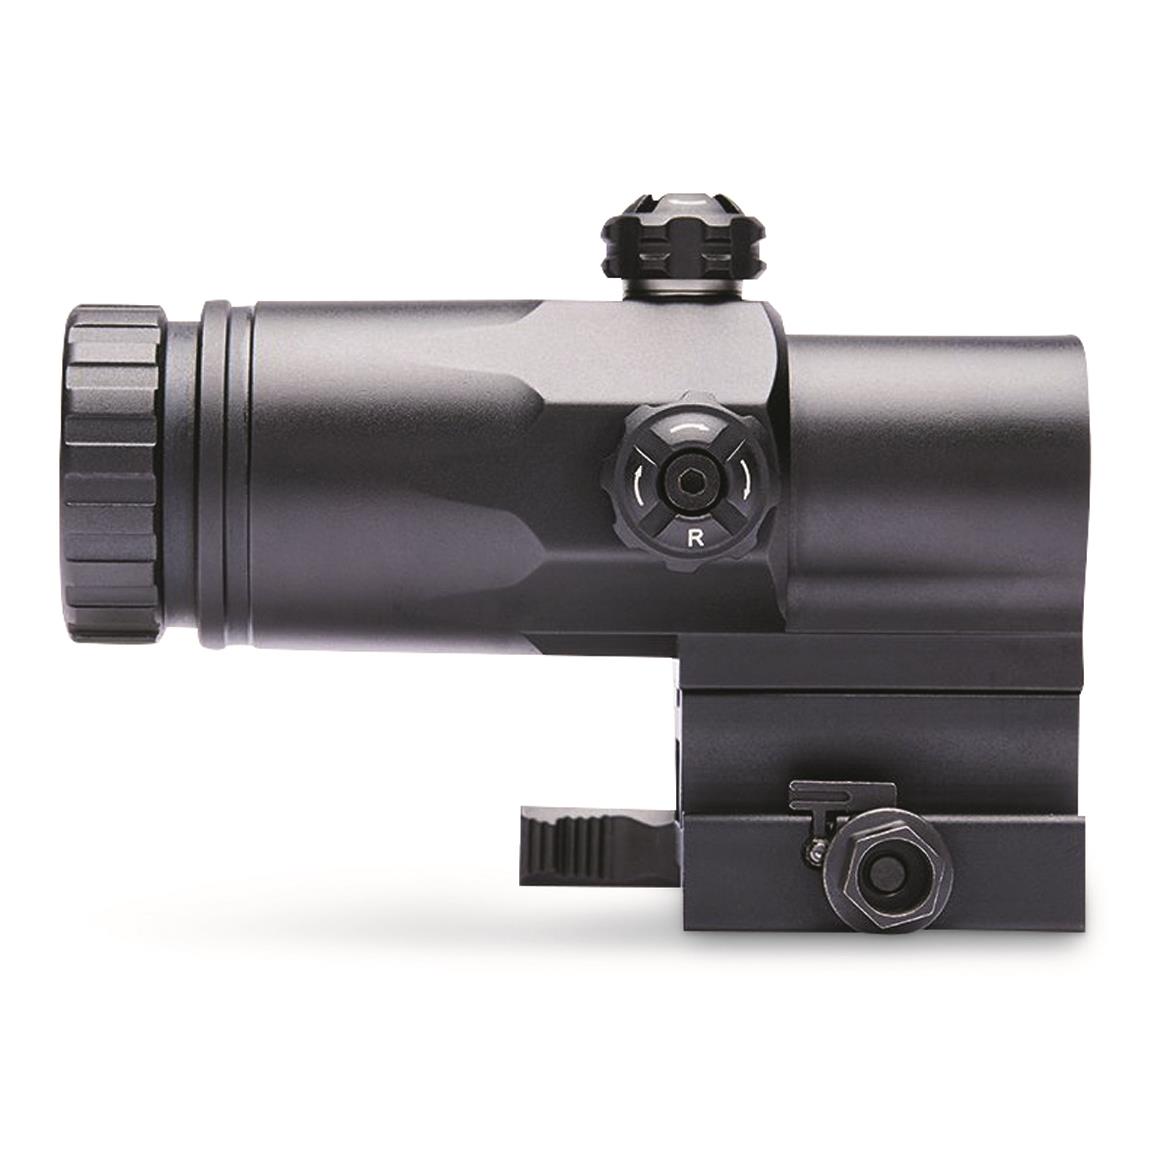 Aimpoint Carbine Optic Aco 705103 Red Dot Sights At Sportsman S Guide